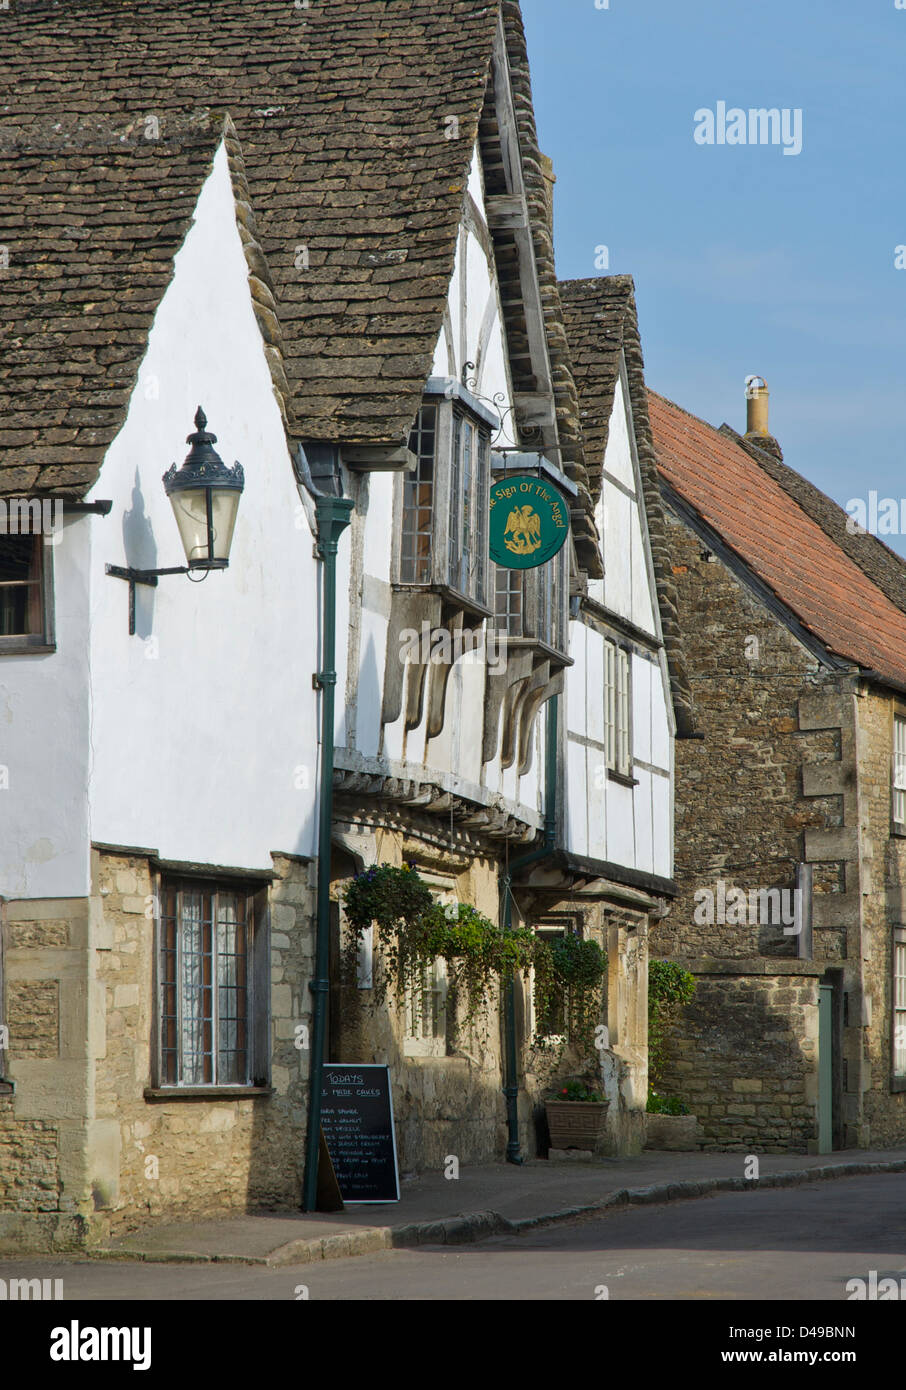 The historic village of Lacock, Wiltshire, England UK Stock Photo